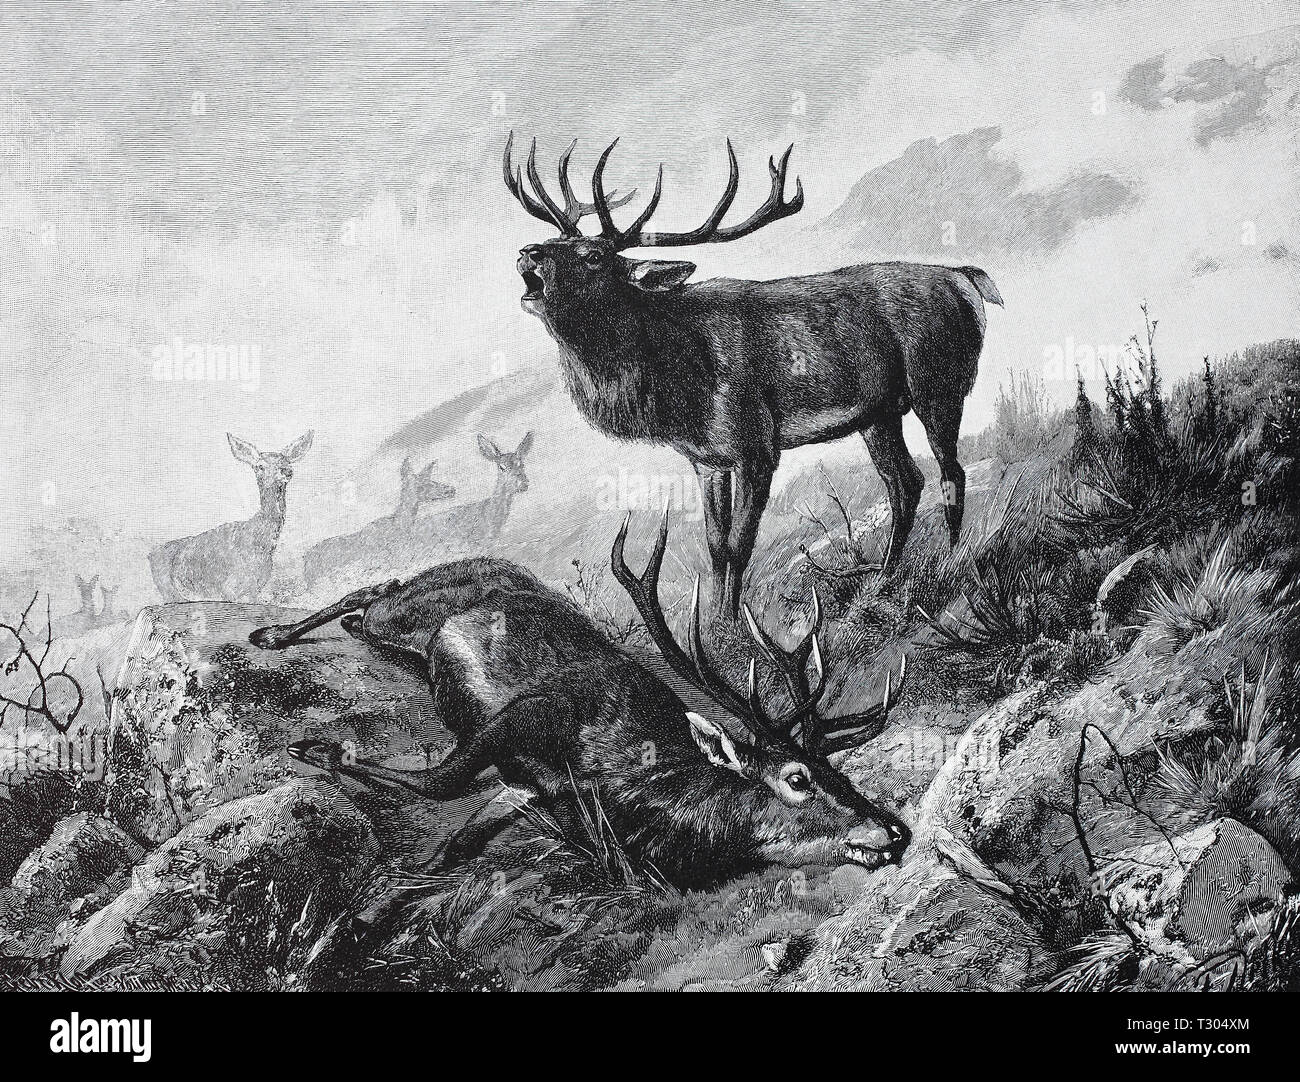 Digital improved reproduction, Finished fight, with the deer rut have fought two deer with each other and one has killed the other, Beendeter Kampf, Bei der Hirschbrunft haben zwei Hirsche miteinander gekämpft und einer hat den anderen getötet, from an original print from the 19th century Stock Photo